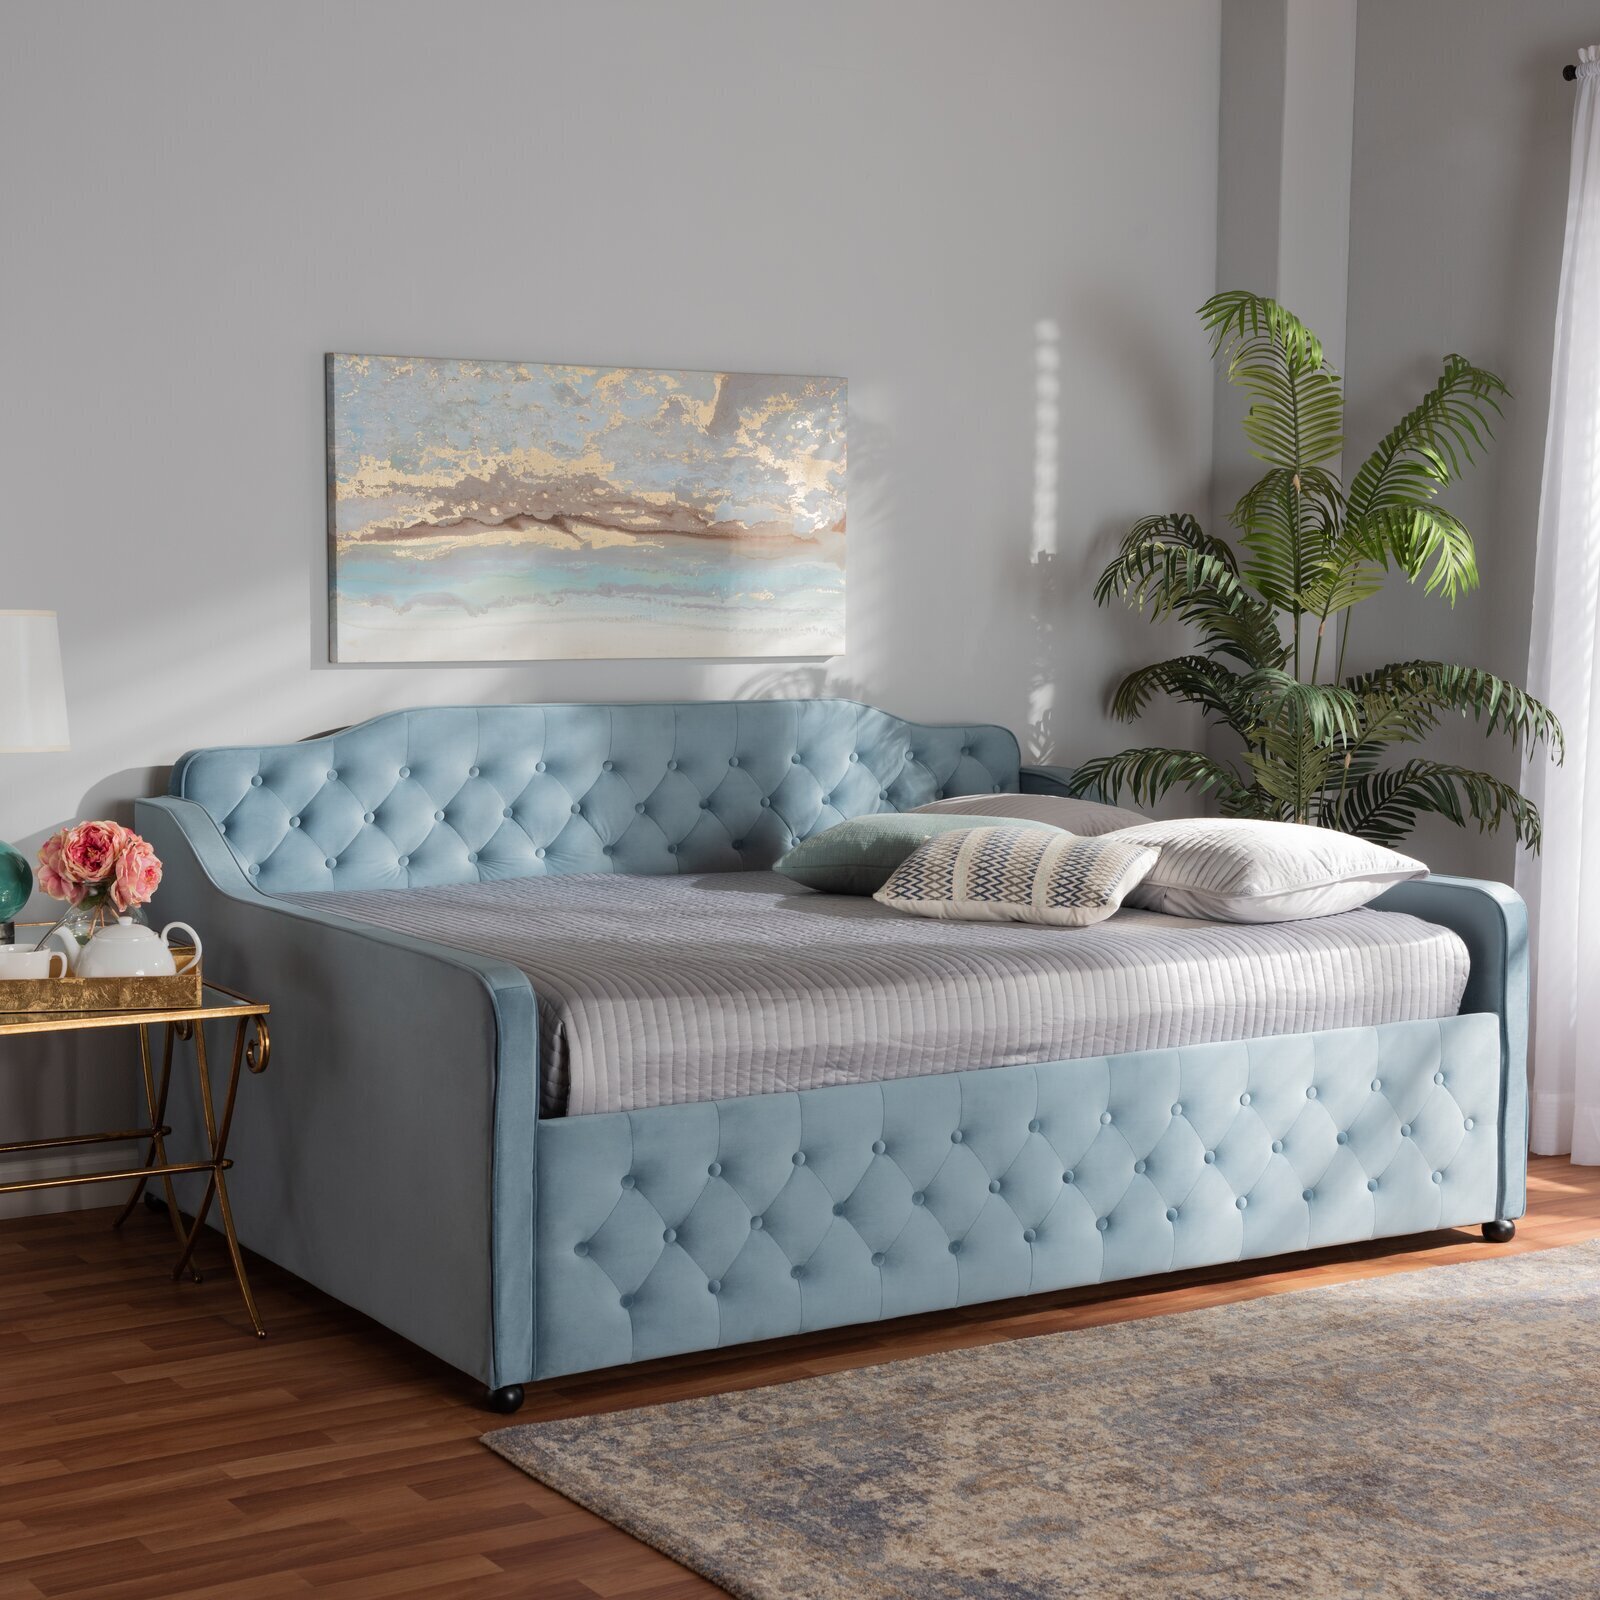 Elegant Day Bed Converts to Queen